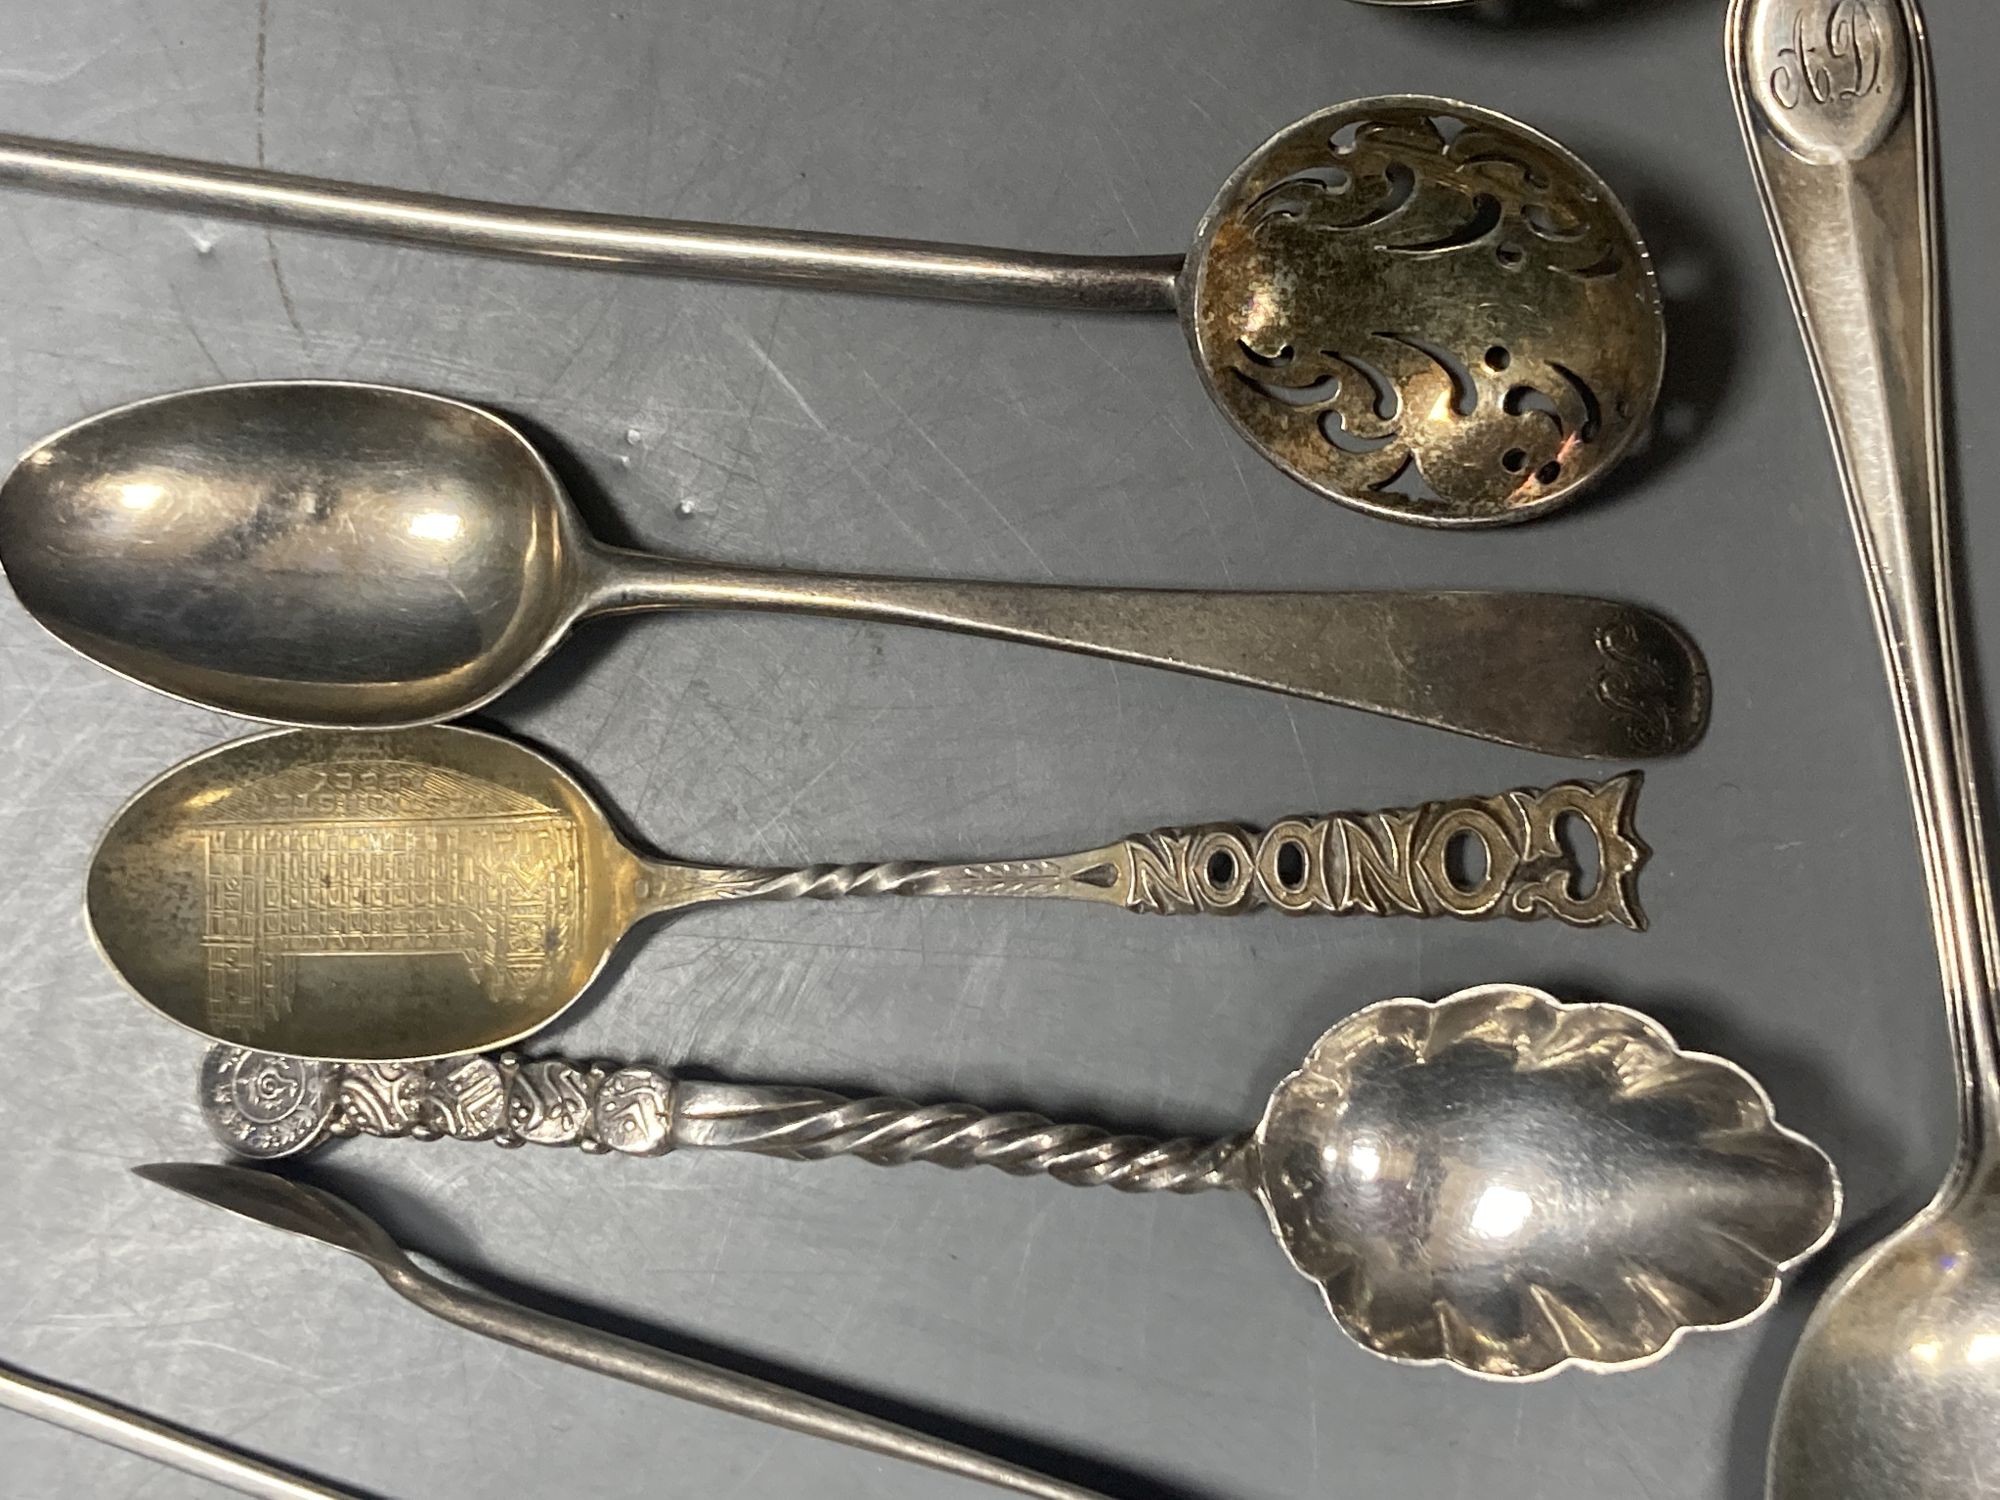 A group of assorted Chinese white metal spoons and forks, including set of six teaspoons and ten small items of English silver.